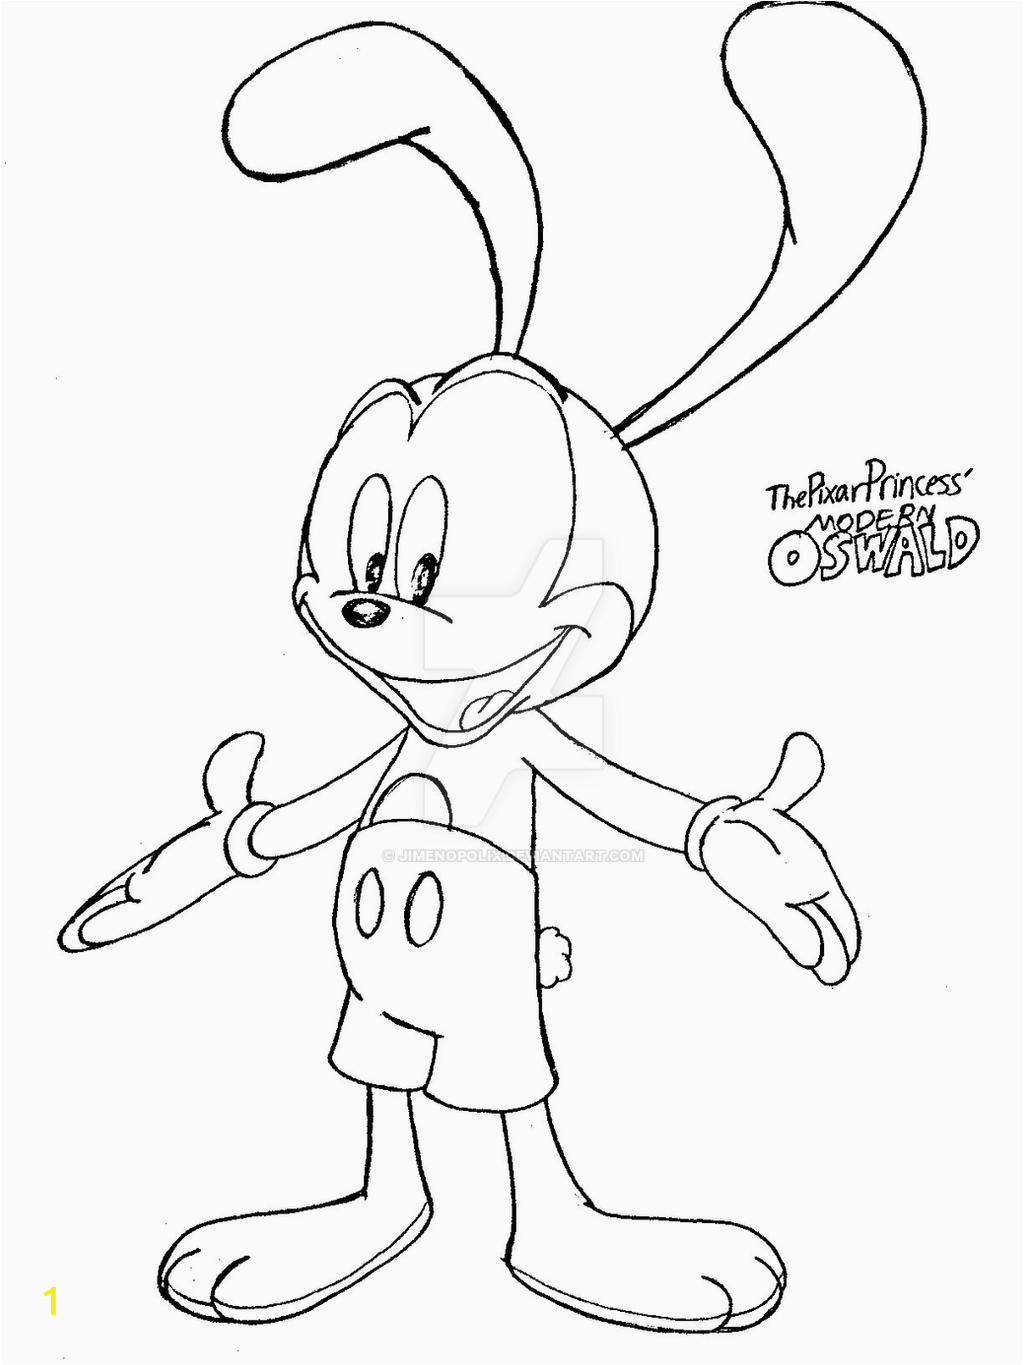 oswald the lucky rabbit coloring pages sketch templates